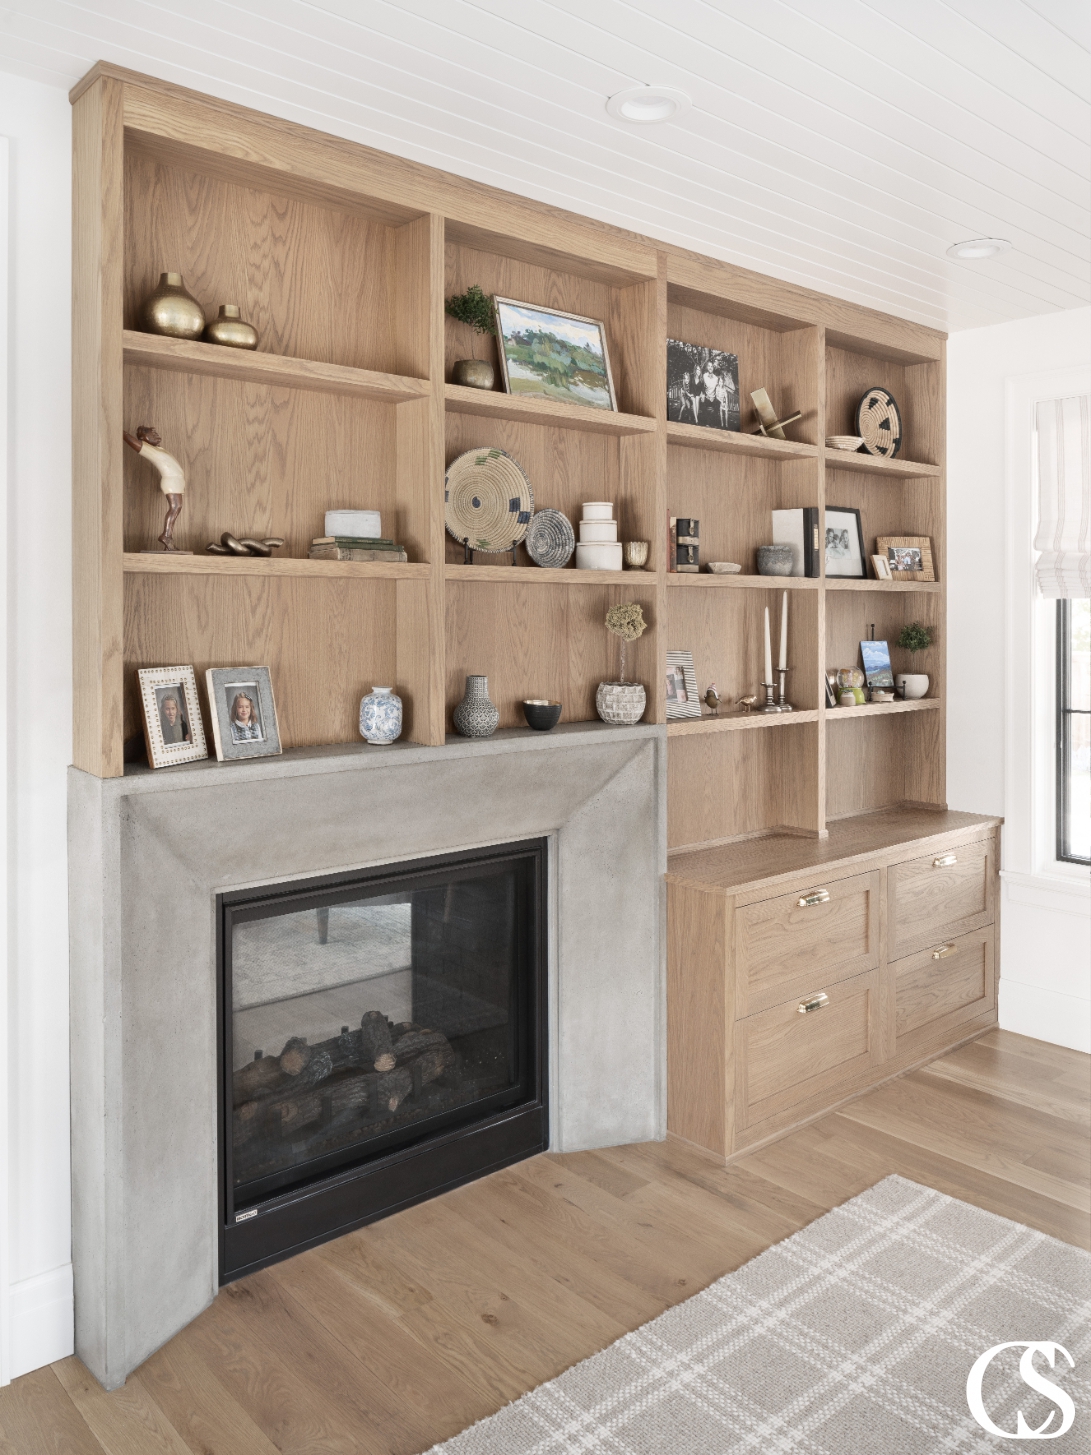 Custom built-in cabinets designed to provide ample storage space while fitting seamlessly into the architecture of the room, featuring a warm wood finish